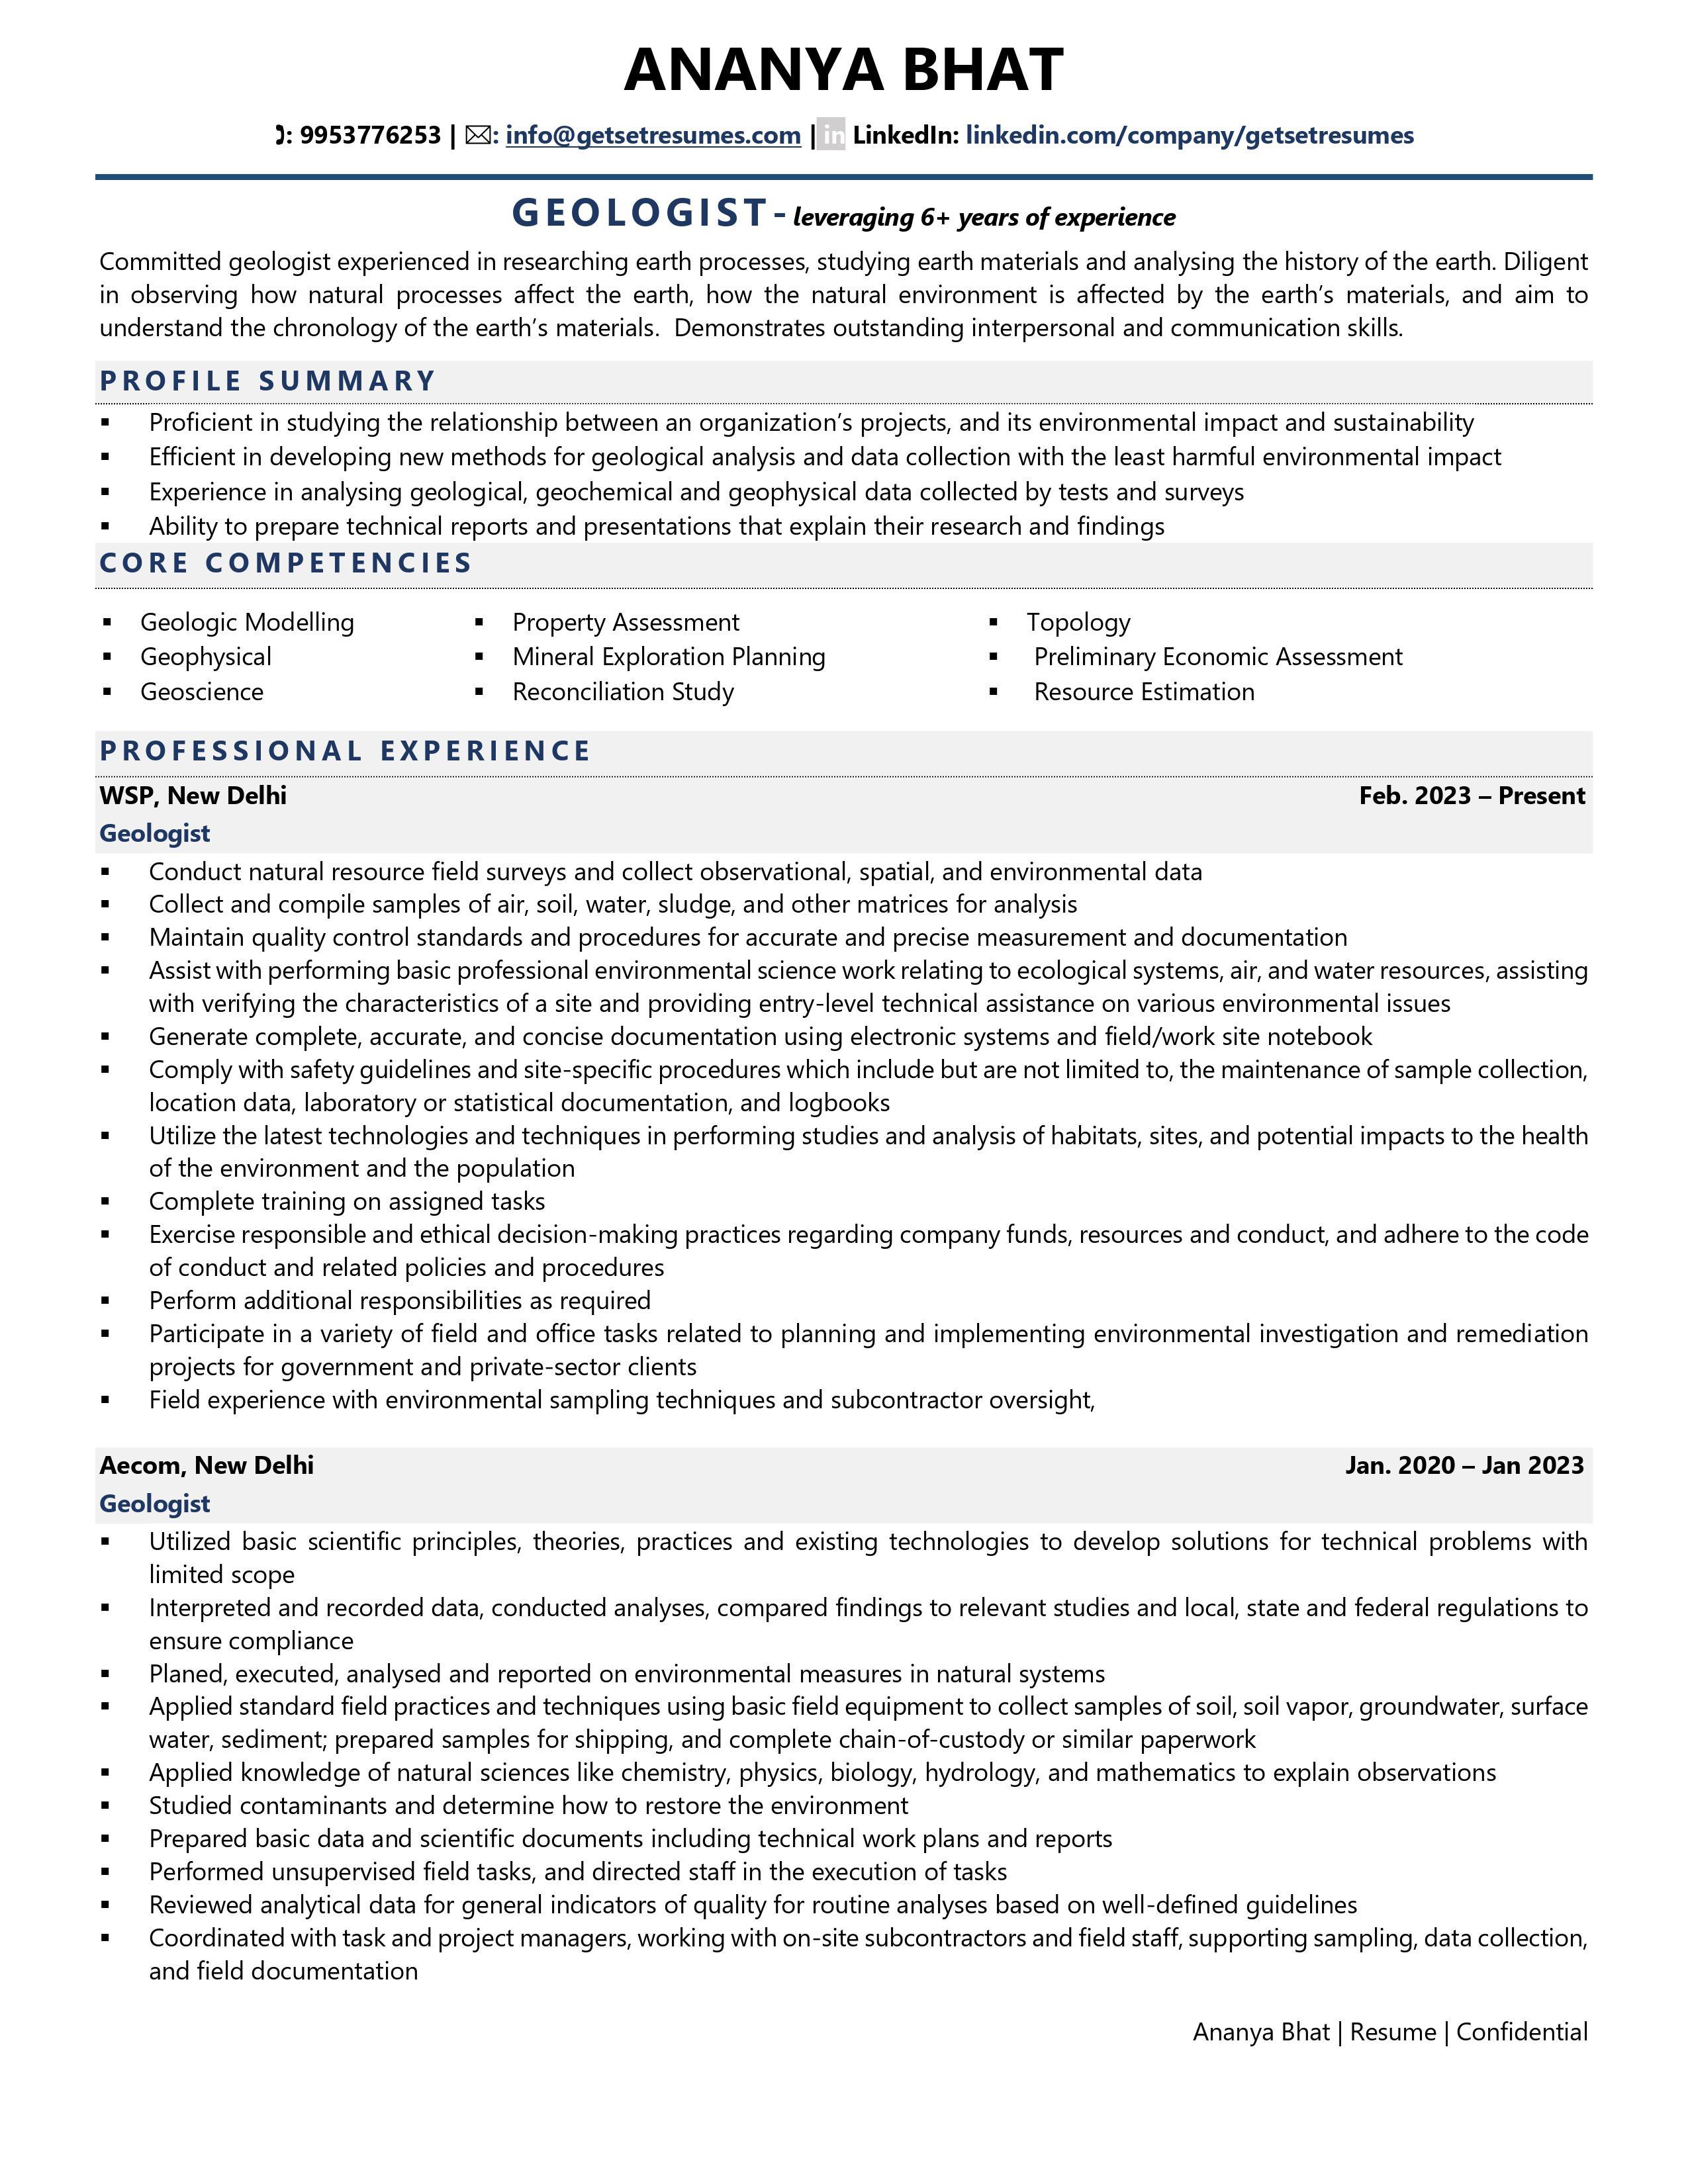 Geologist - Resume Example & Template